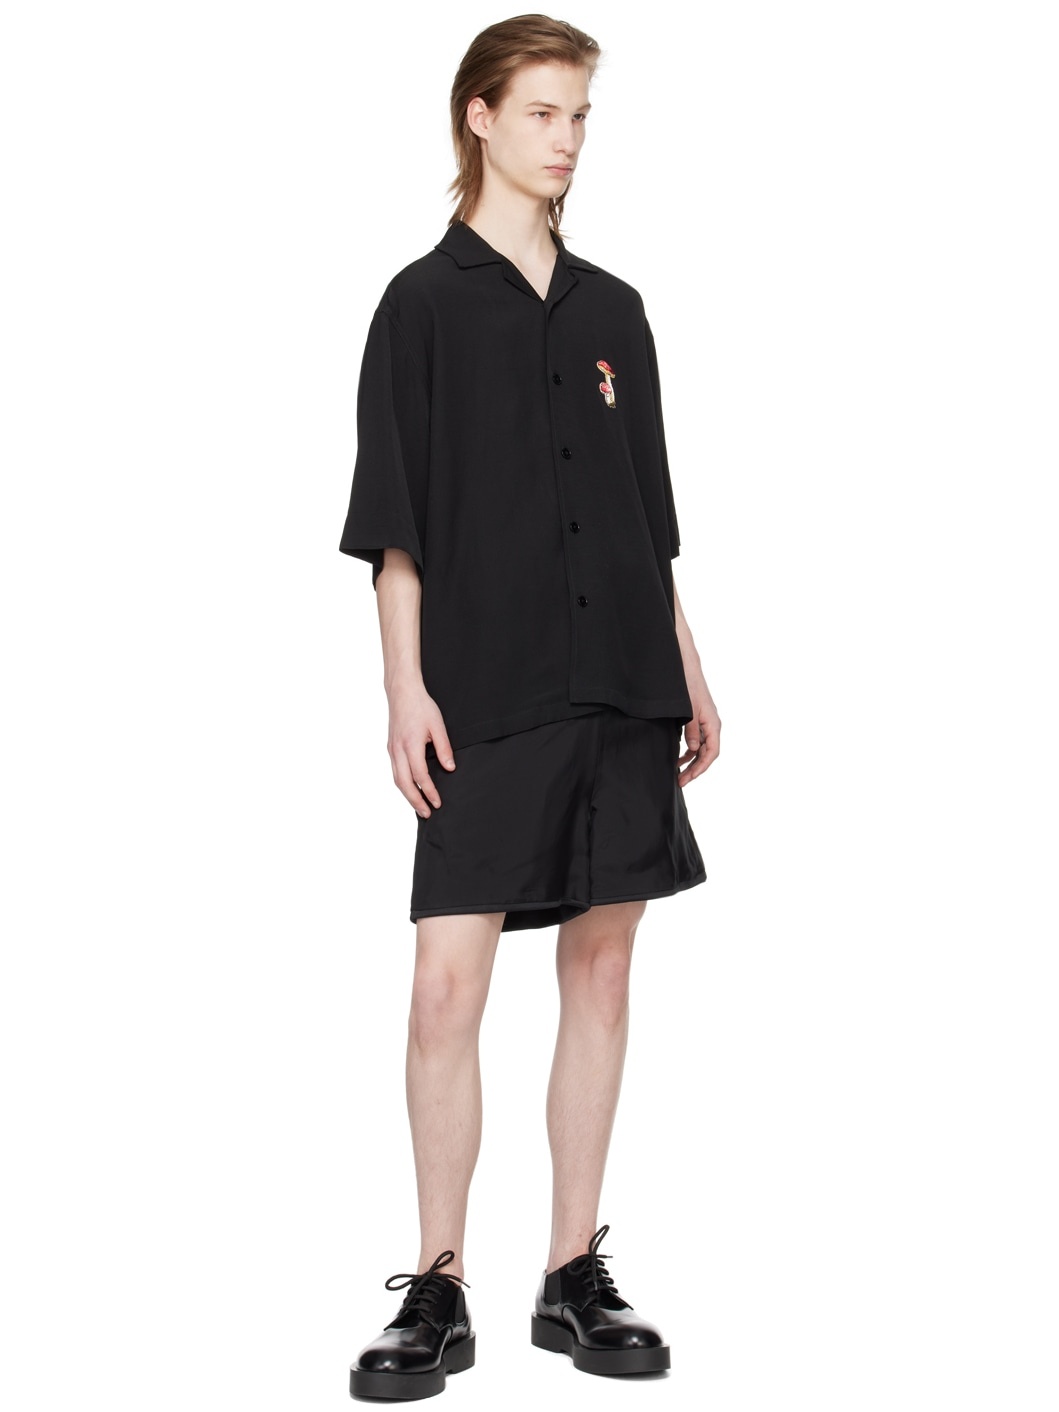 Black Embroidered Shirt - 4